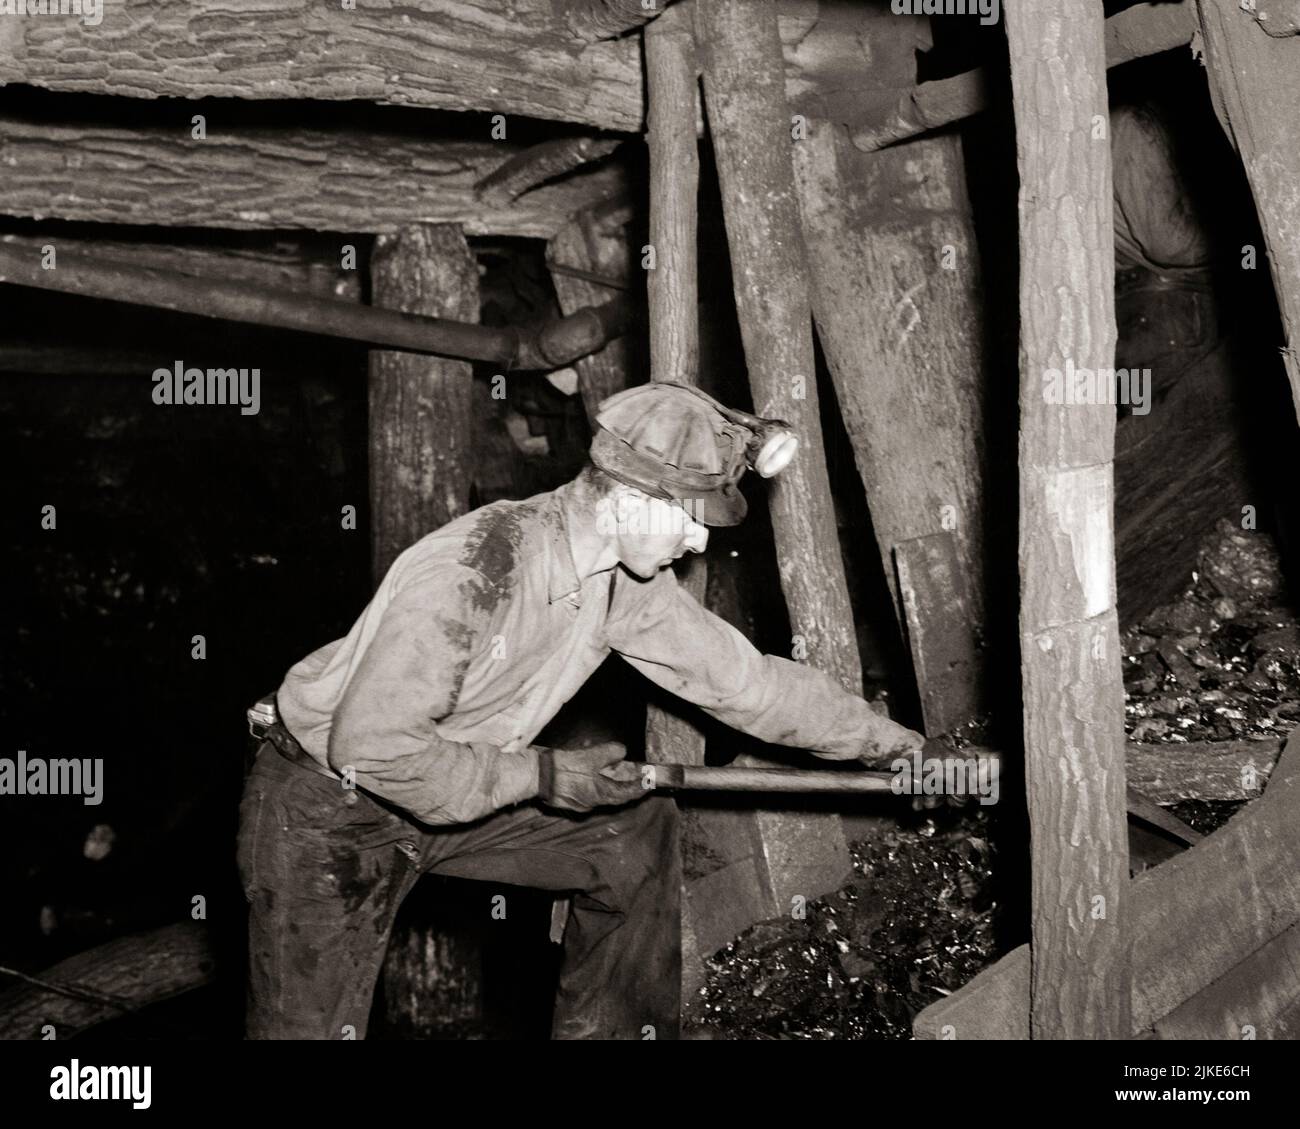 1940s MAN COAL MINER SHOVELING ANTHRACITE COAL IN PHILADELPHIA & READING COAL & IRON COMPANY MINE POTTSVILLE, PA USA - i829 HAR001 HARS MINER SHOVELING HIGH ANGLE HARD HAT MINERS PA LABOR WORLD WAR TWO WORLD WAR II EMPLOYMENT OCCUPATIONS COMPANY WORLD WAR 2 ANTHRACITE EMPLOYEE HEAD LAMP DEFENSE MID-ADULT MID-ADULT MAN BLACK AND WHITE CAUCASIAN ETHNICITY CIVILIAN HAR001 LABORING MINES OLD FASHIONED Stock Photo